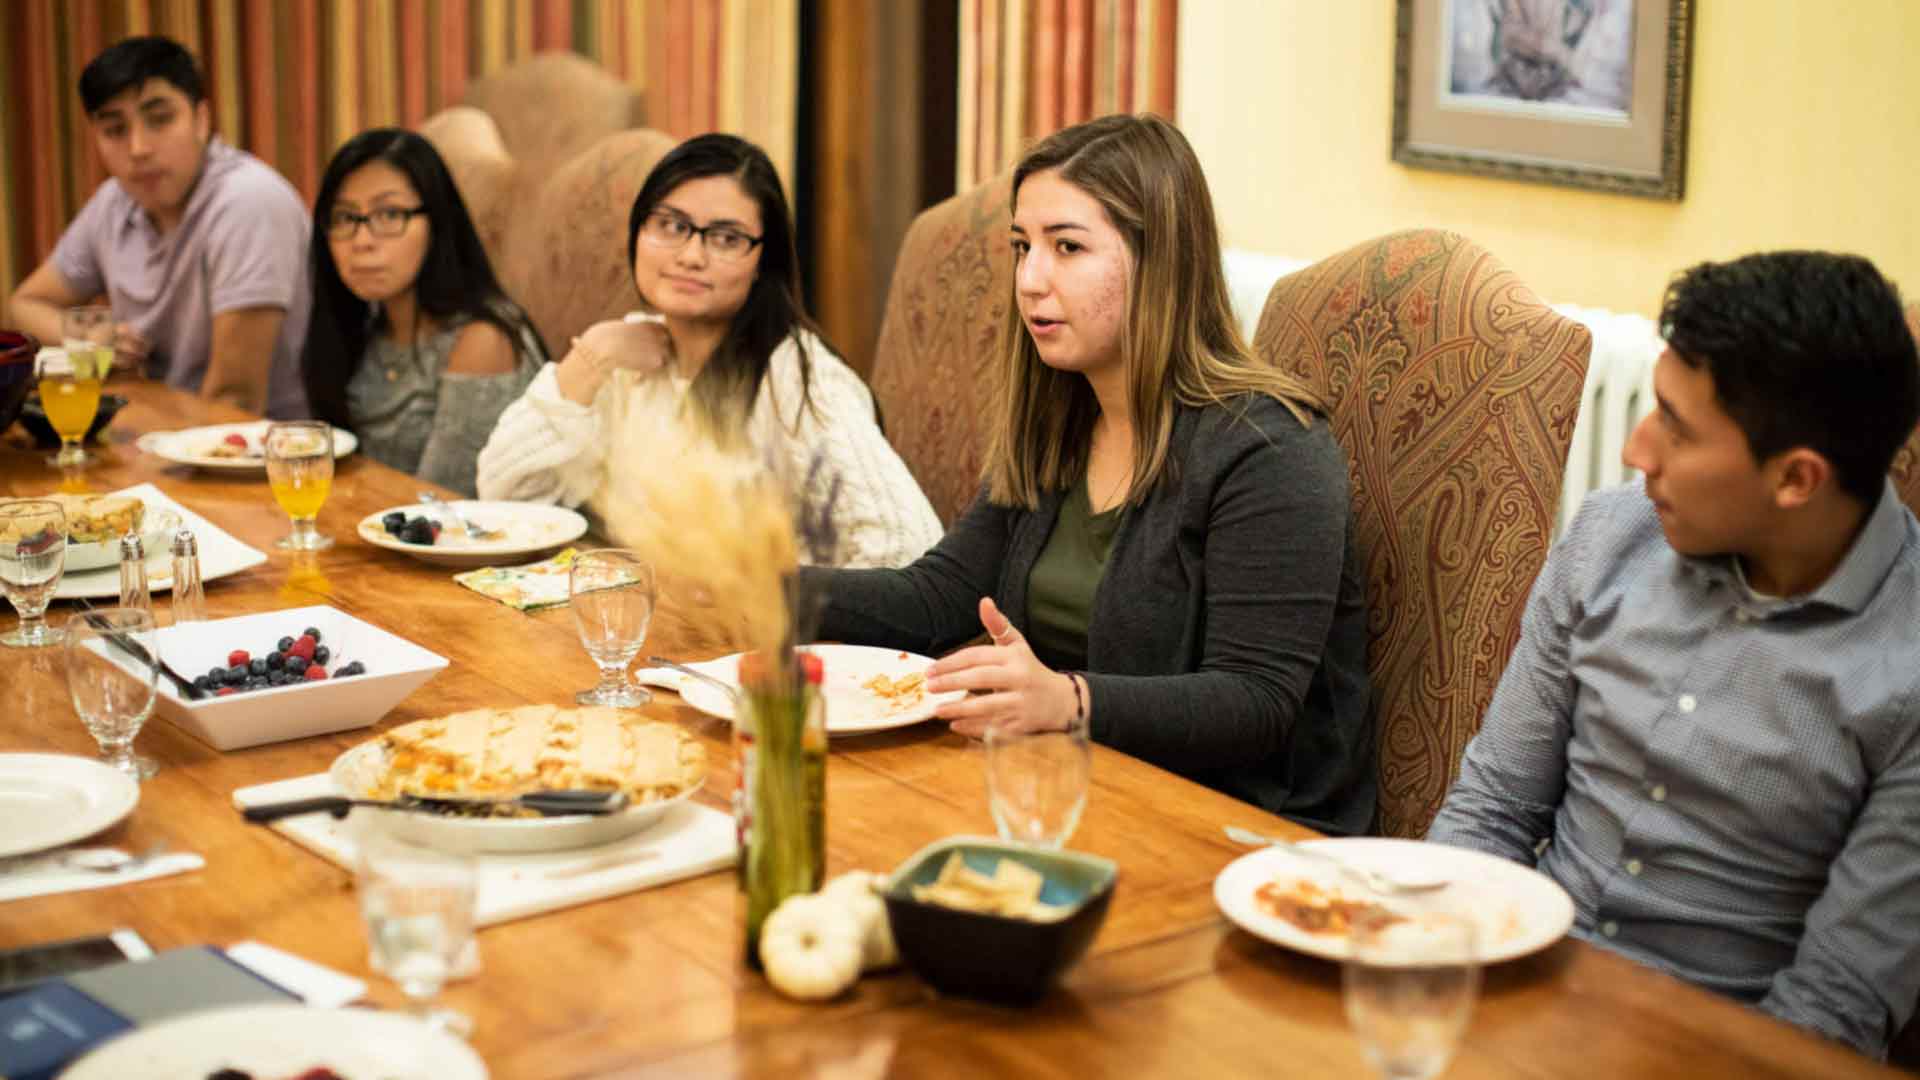 Members of the Latino Scholars Program gather for communal a dinner and discussion in Sitzmann Hall on the St. Paul campus.